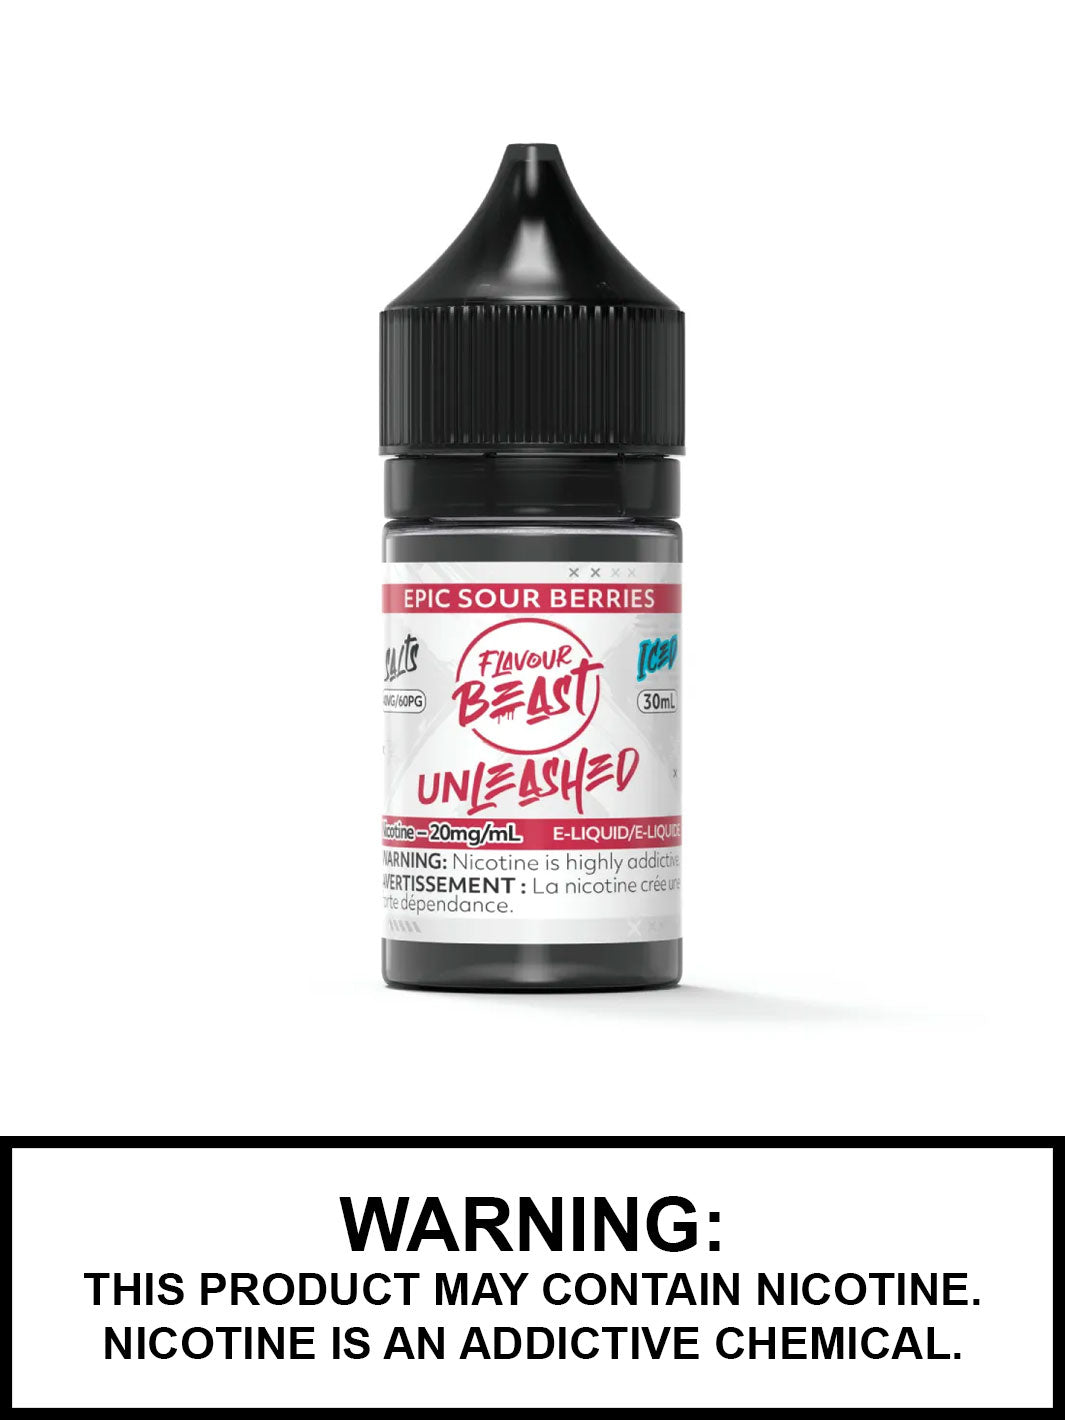 Epic Sour Berries Iced Flavour Beast Unleashed Salts, Salt Nic Flavour Beast Flavours, Vape360 Canada